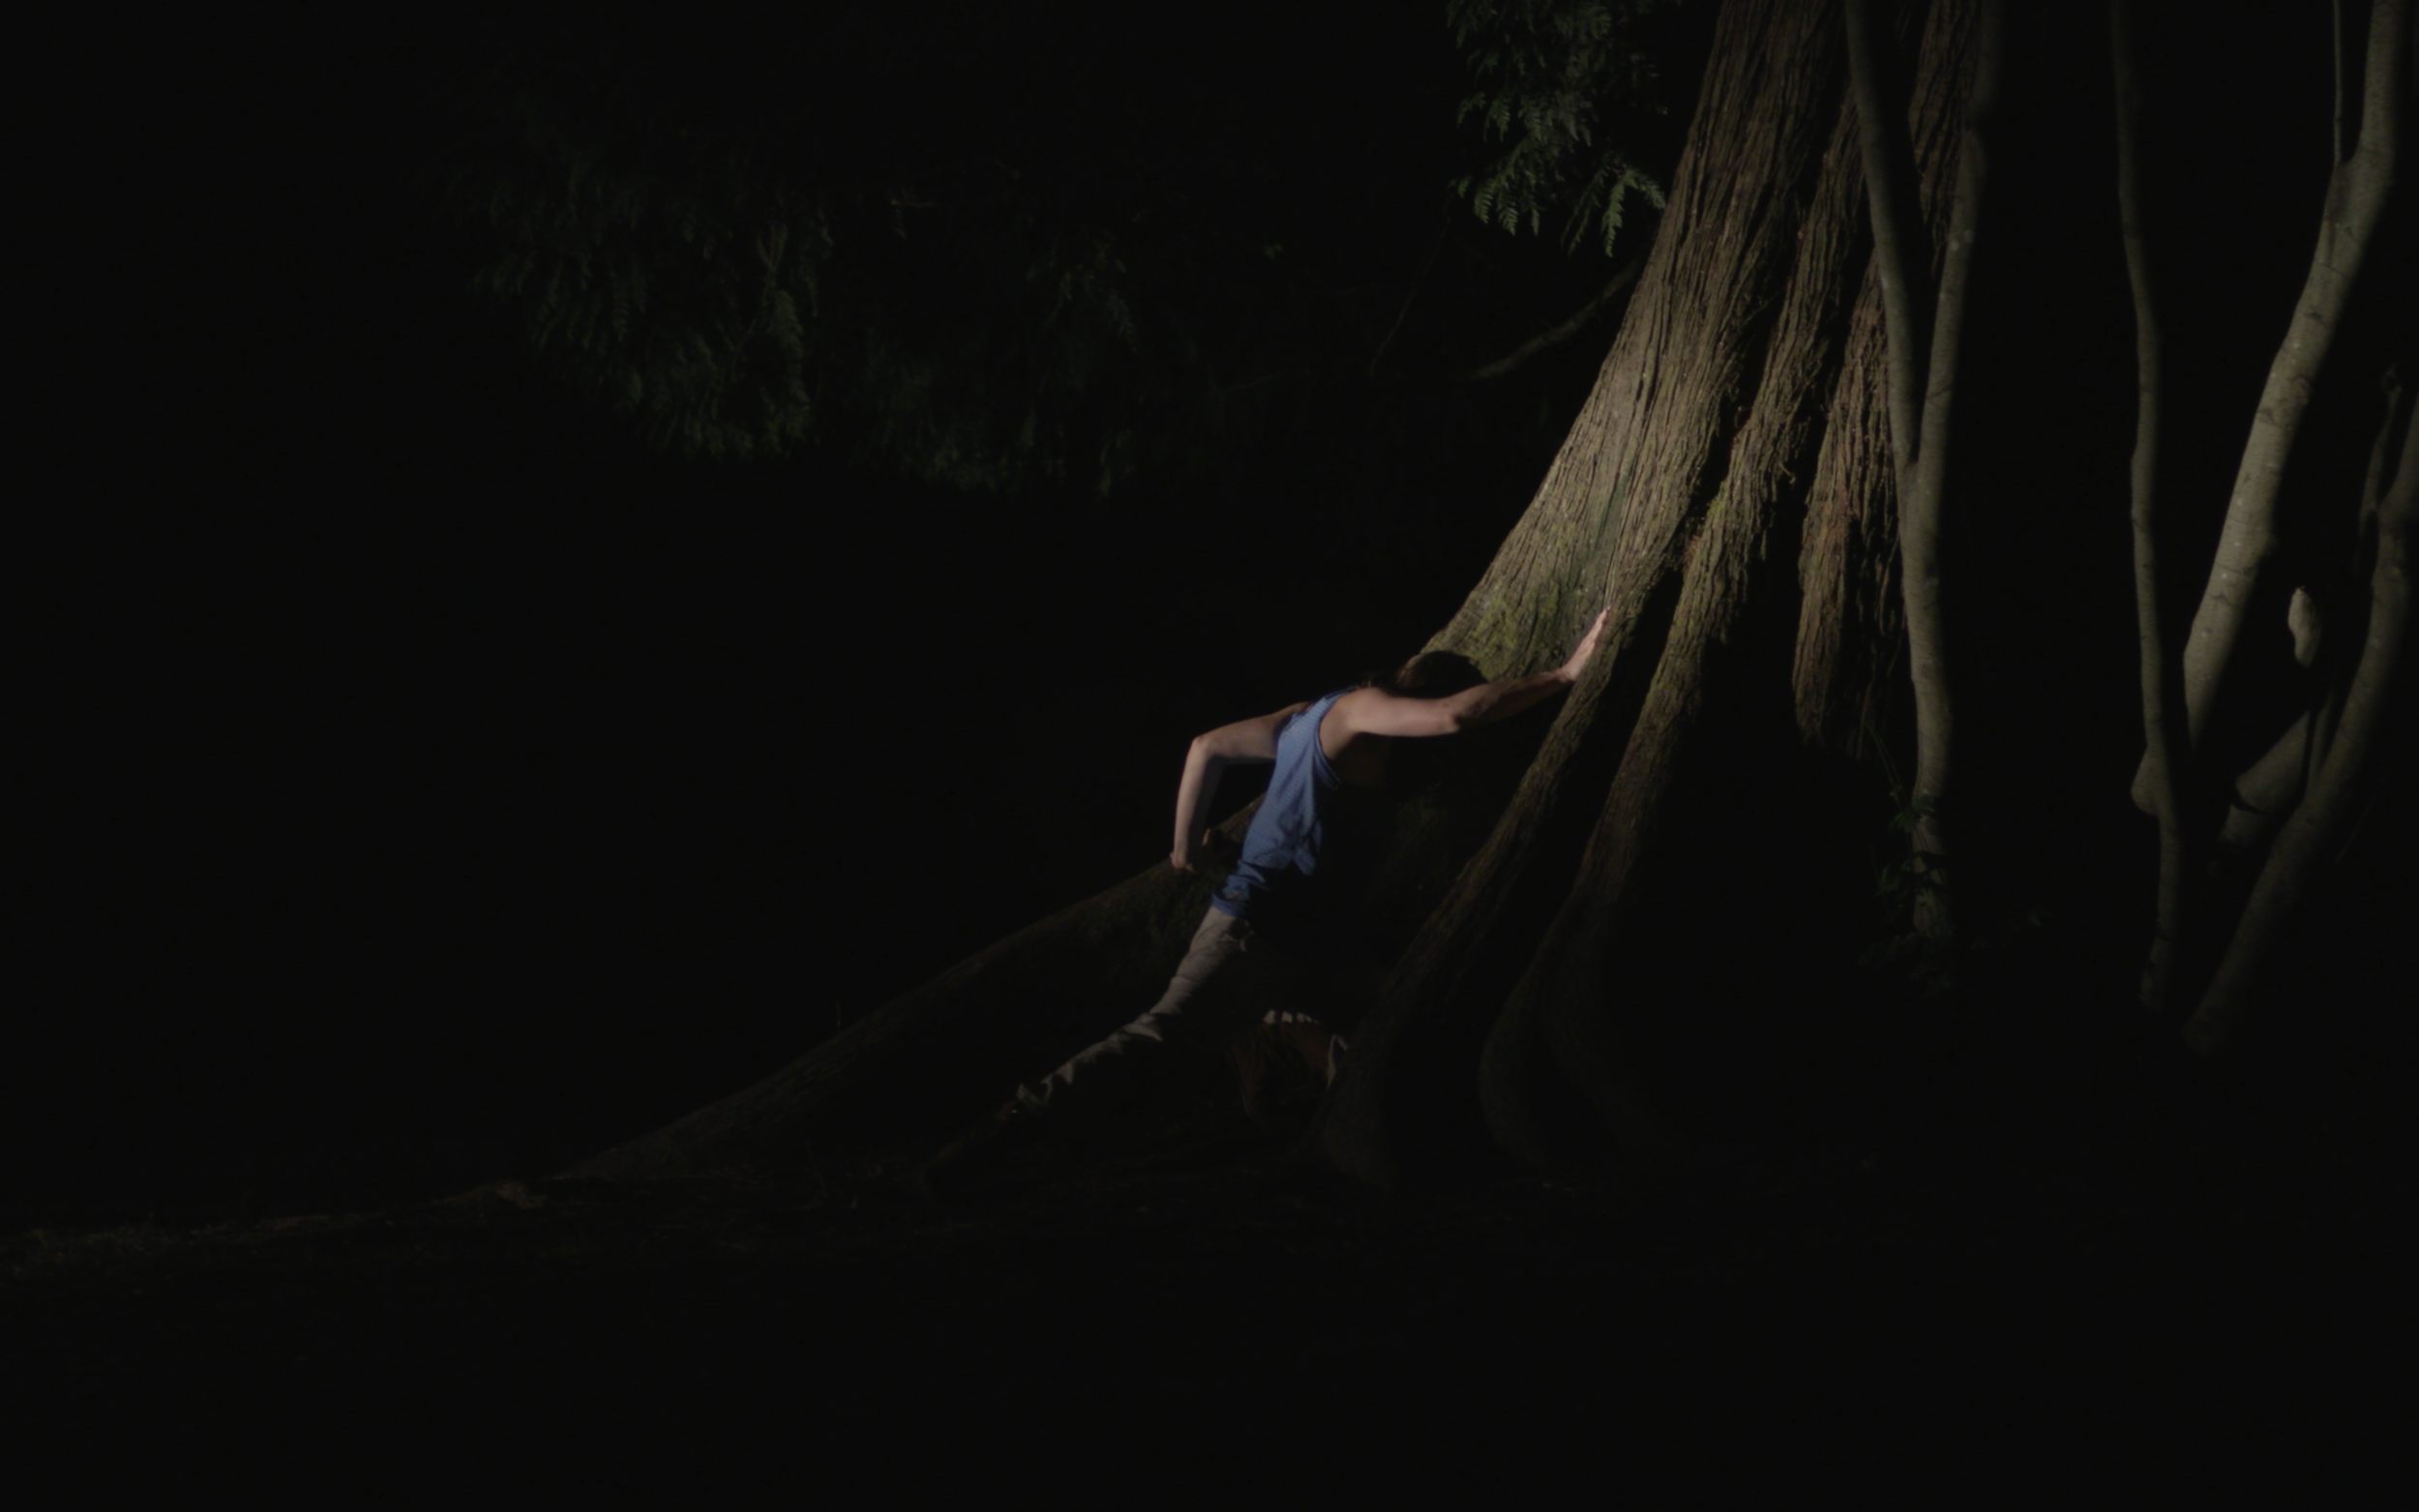   *** BecauseWeAreUsedToLiving ***  Created and performed by Olivia Shaffer, concept by Dave Biddle, cinematography by David Ehrenreich near The Hollow Tree at Stanley Park September 2017 